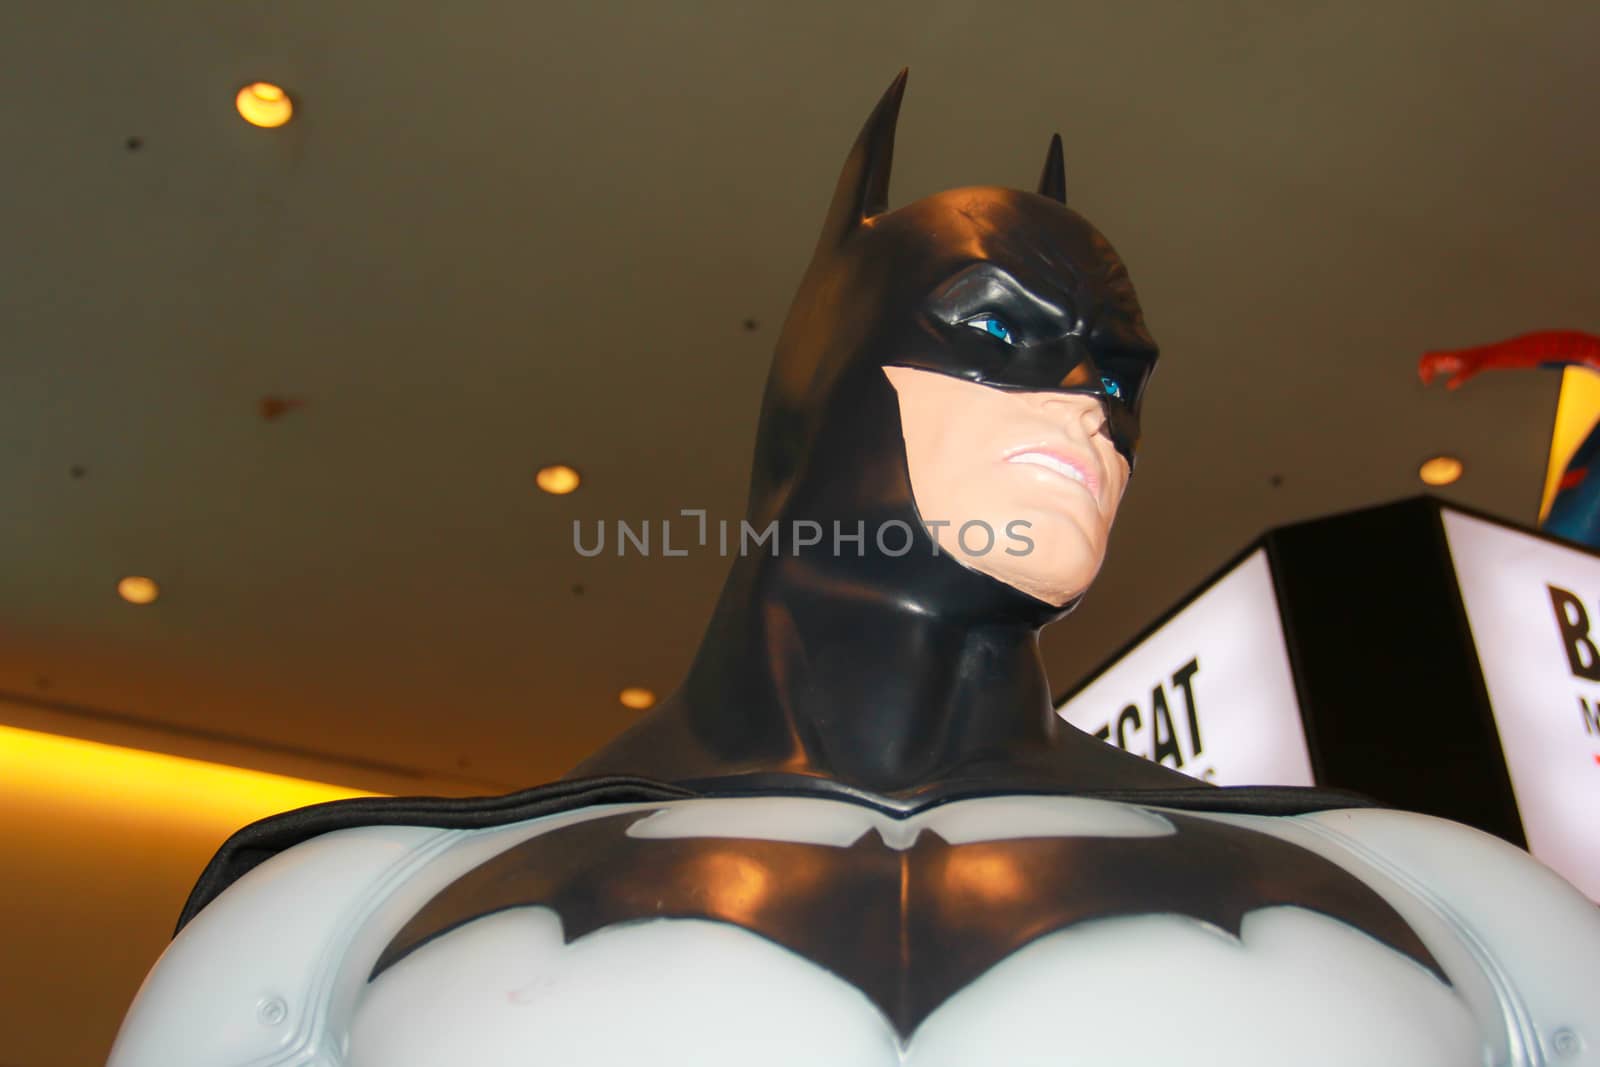 A model of the character Batman from the movies and comics 5 by redthirteen